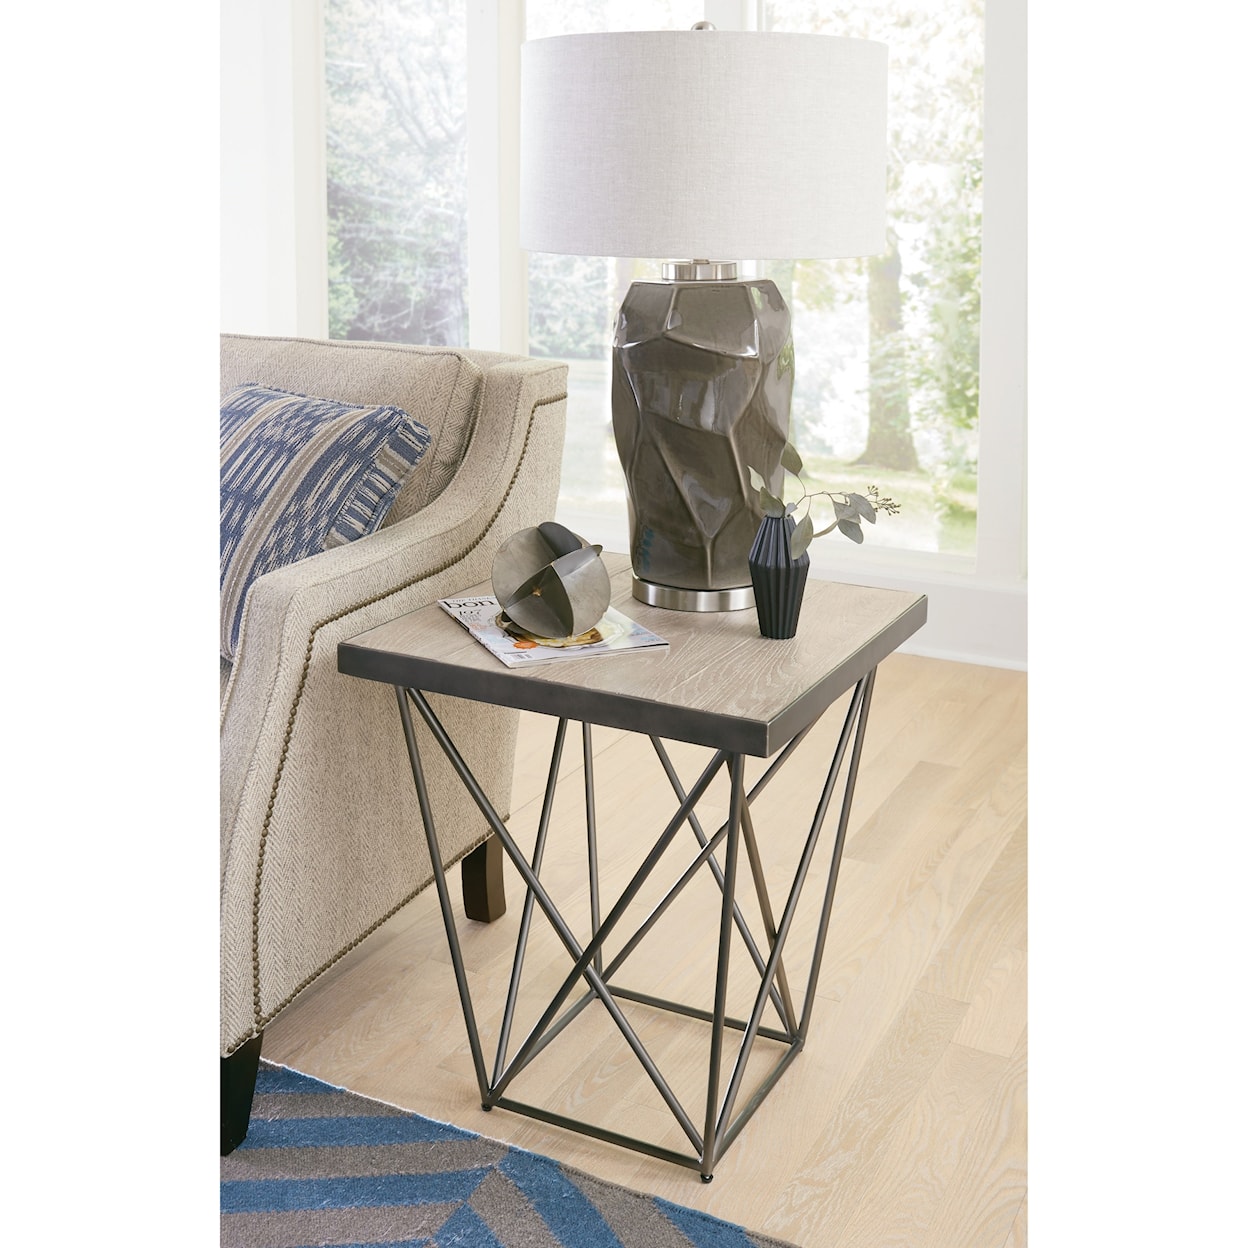 Hammary Rafters Square End Table